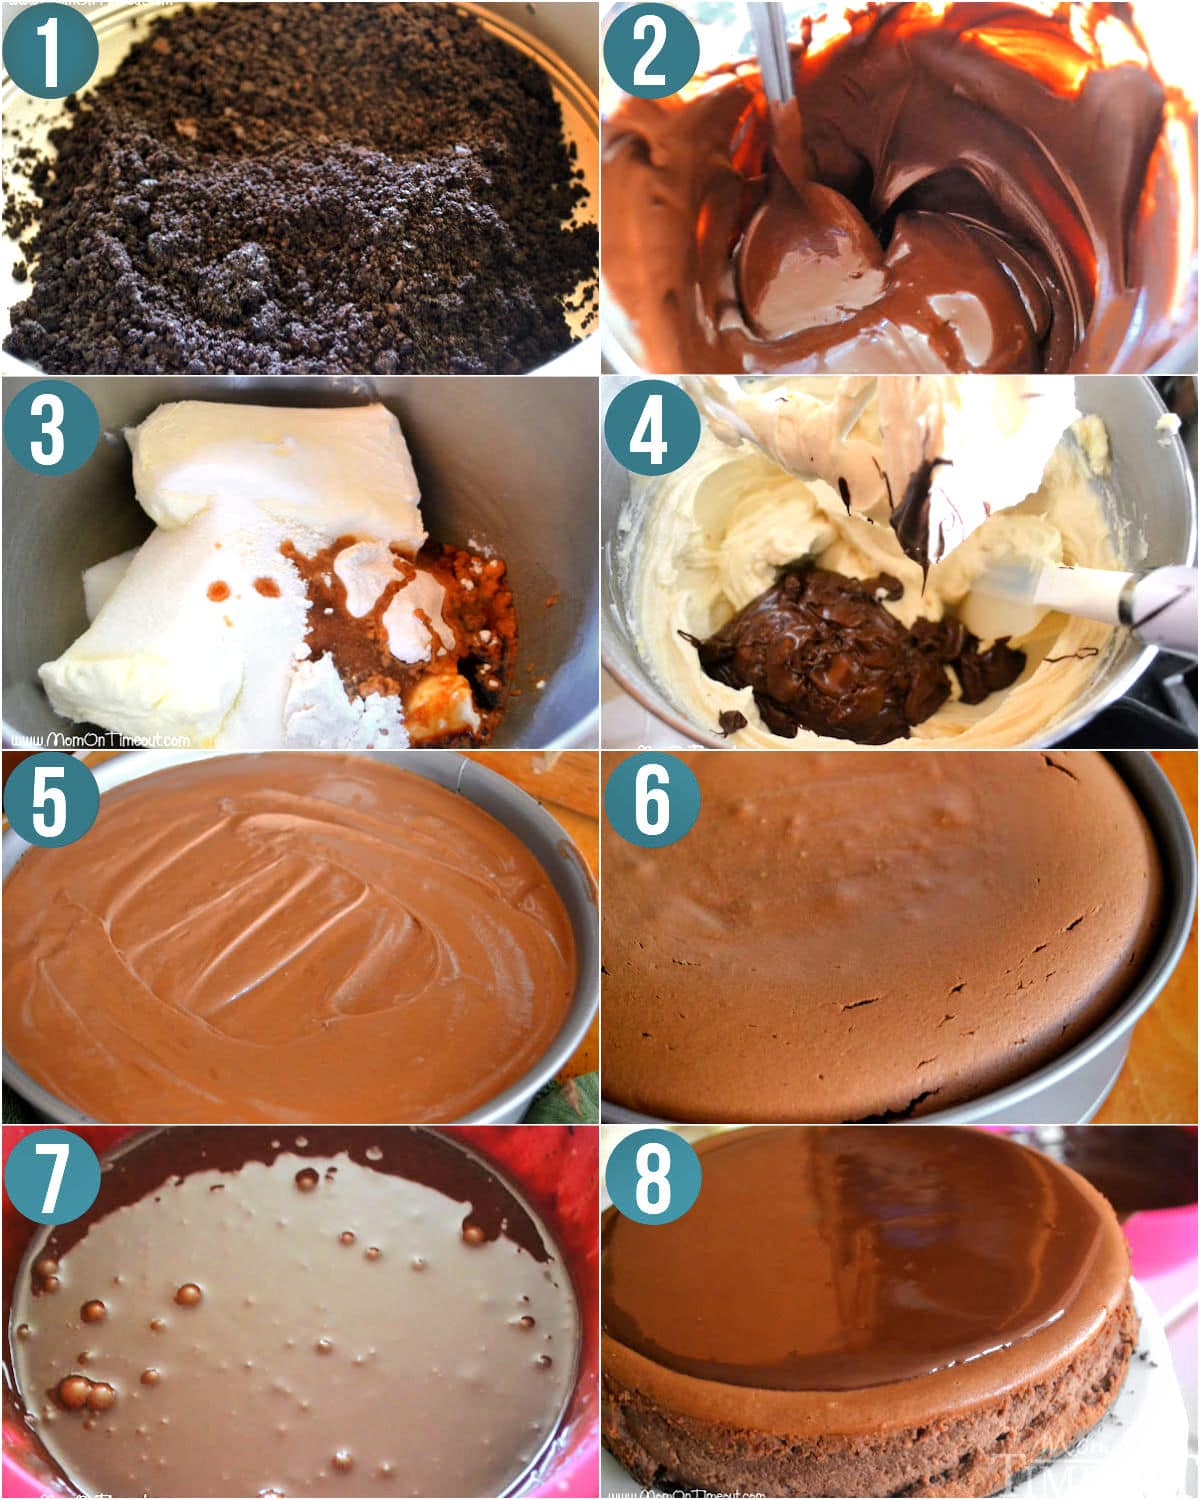 Eight image collage showing how to make chocolate cheesecake step by step.